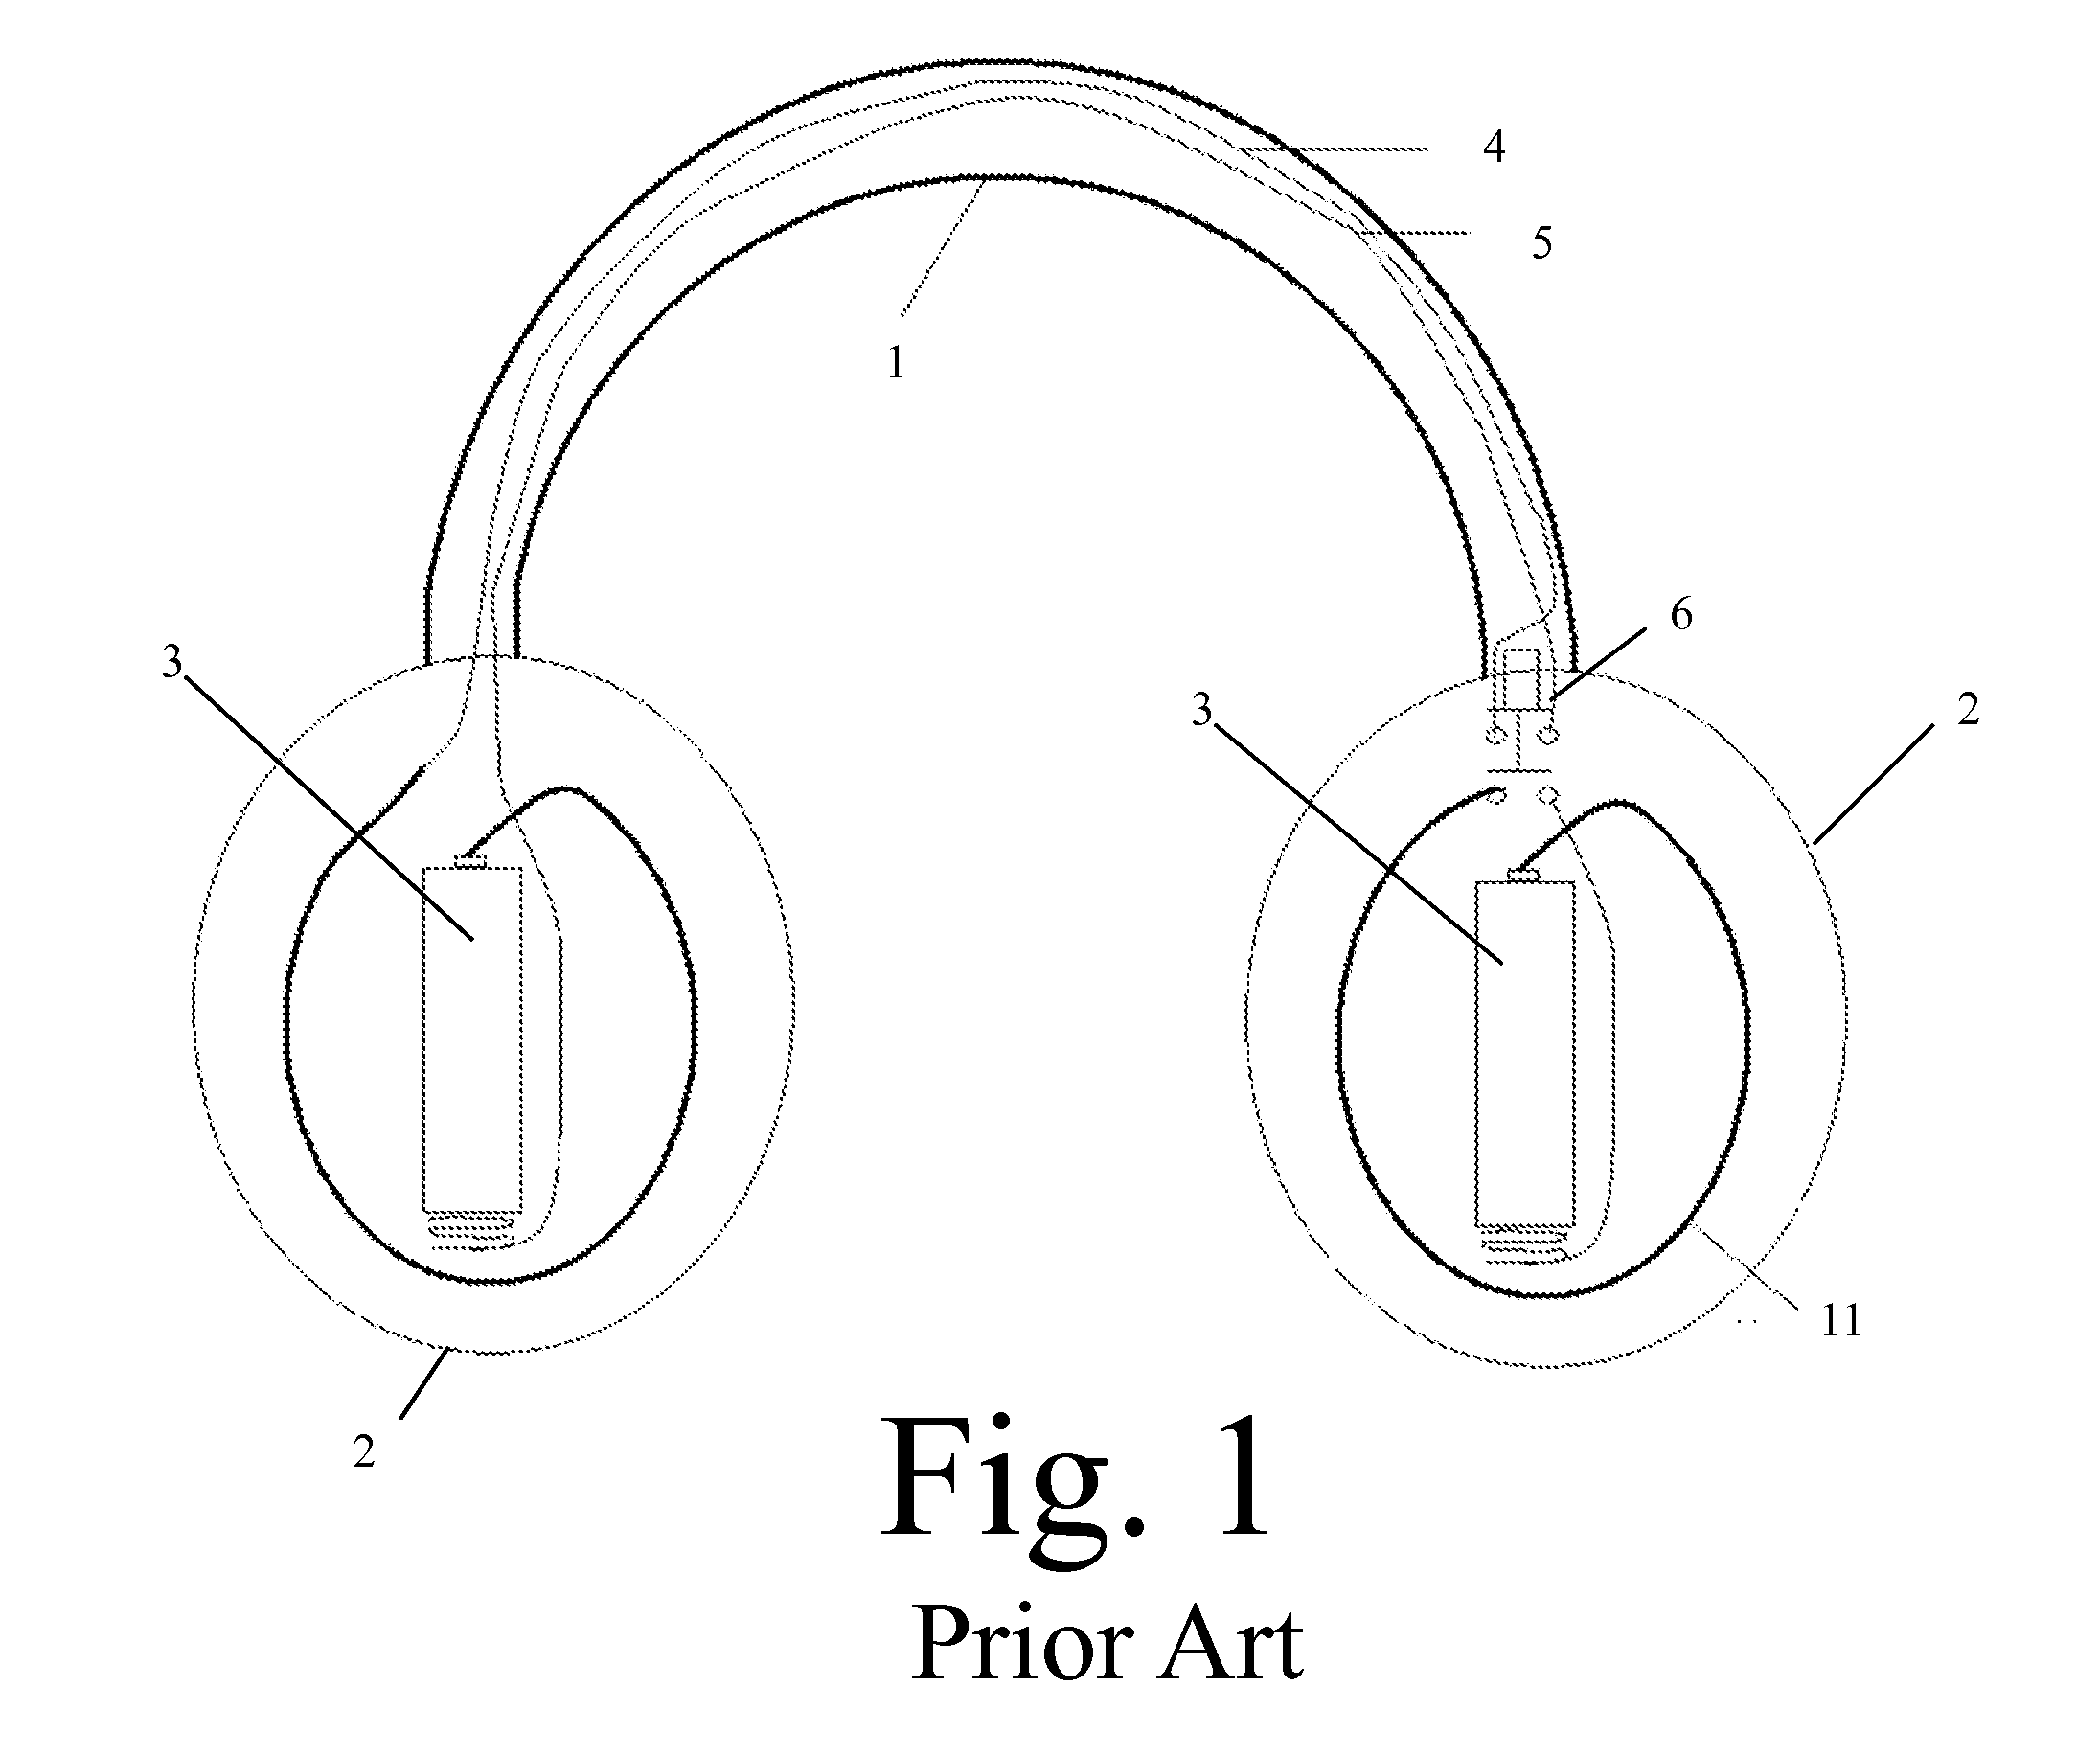 Heated Earmuff With Improved Frame and Heating Element